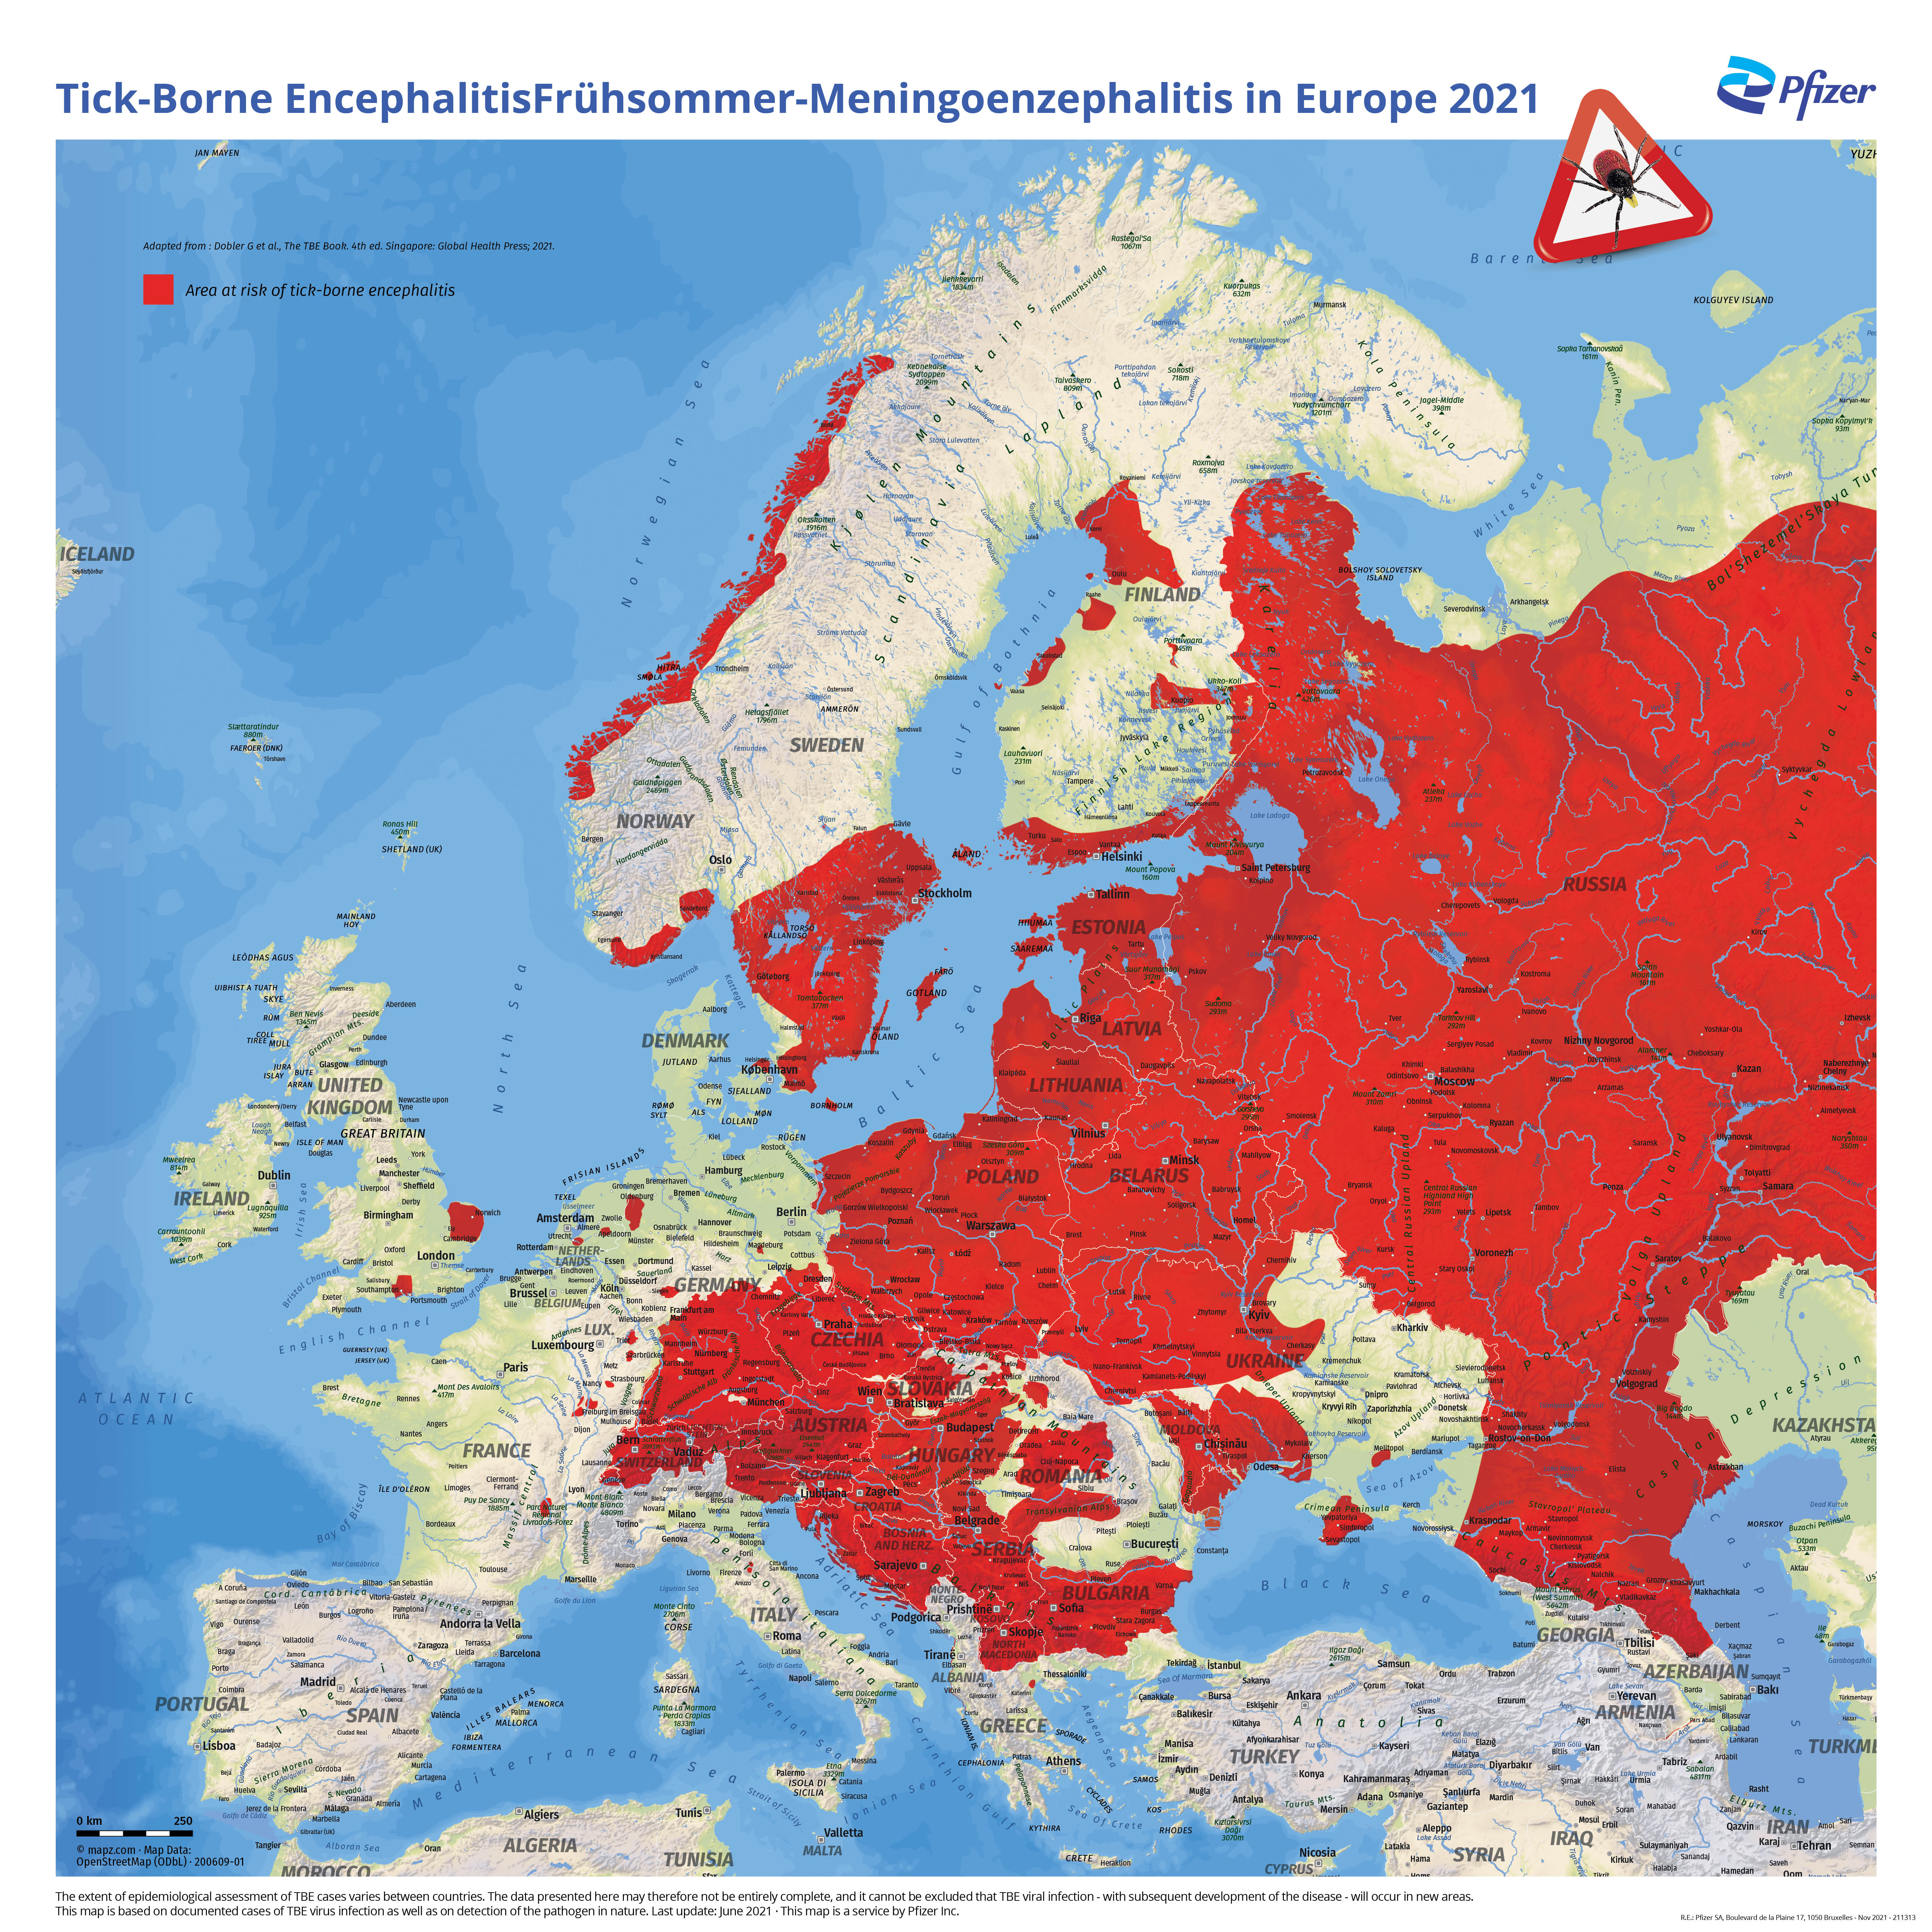 Map showing the distribution area of tick-borne encephalitis in Europe coloured red.